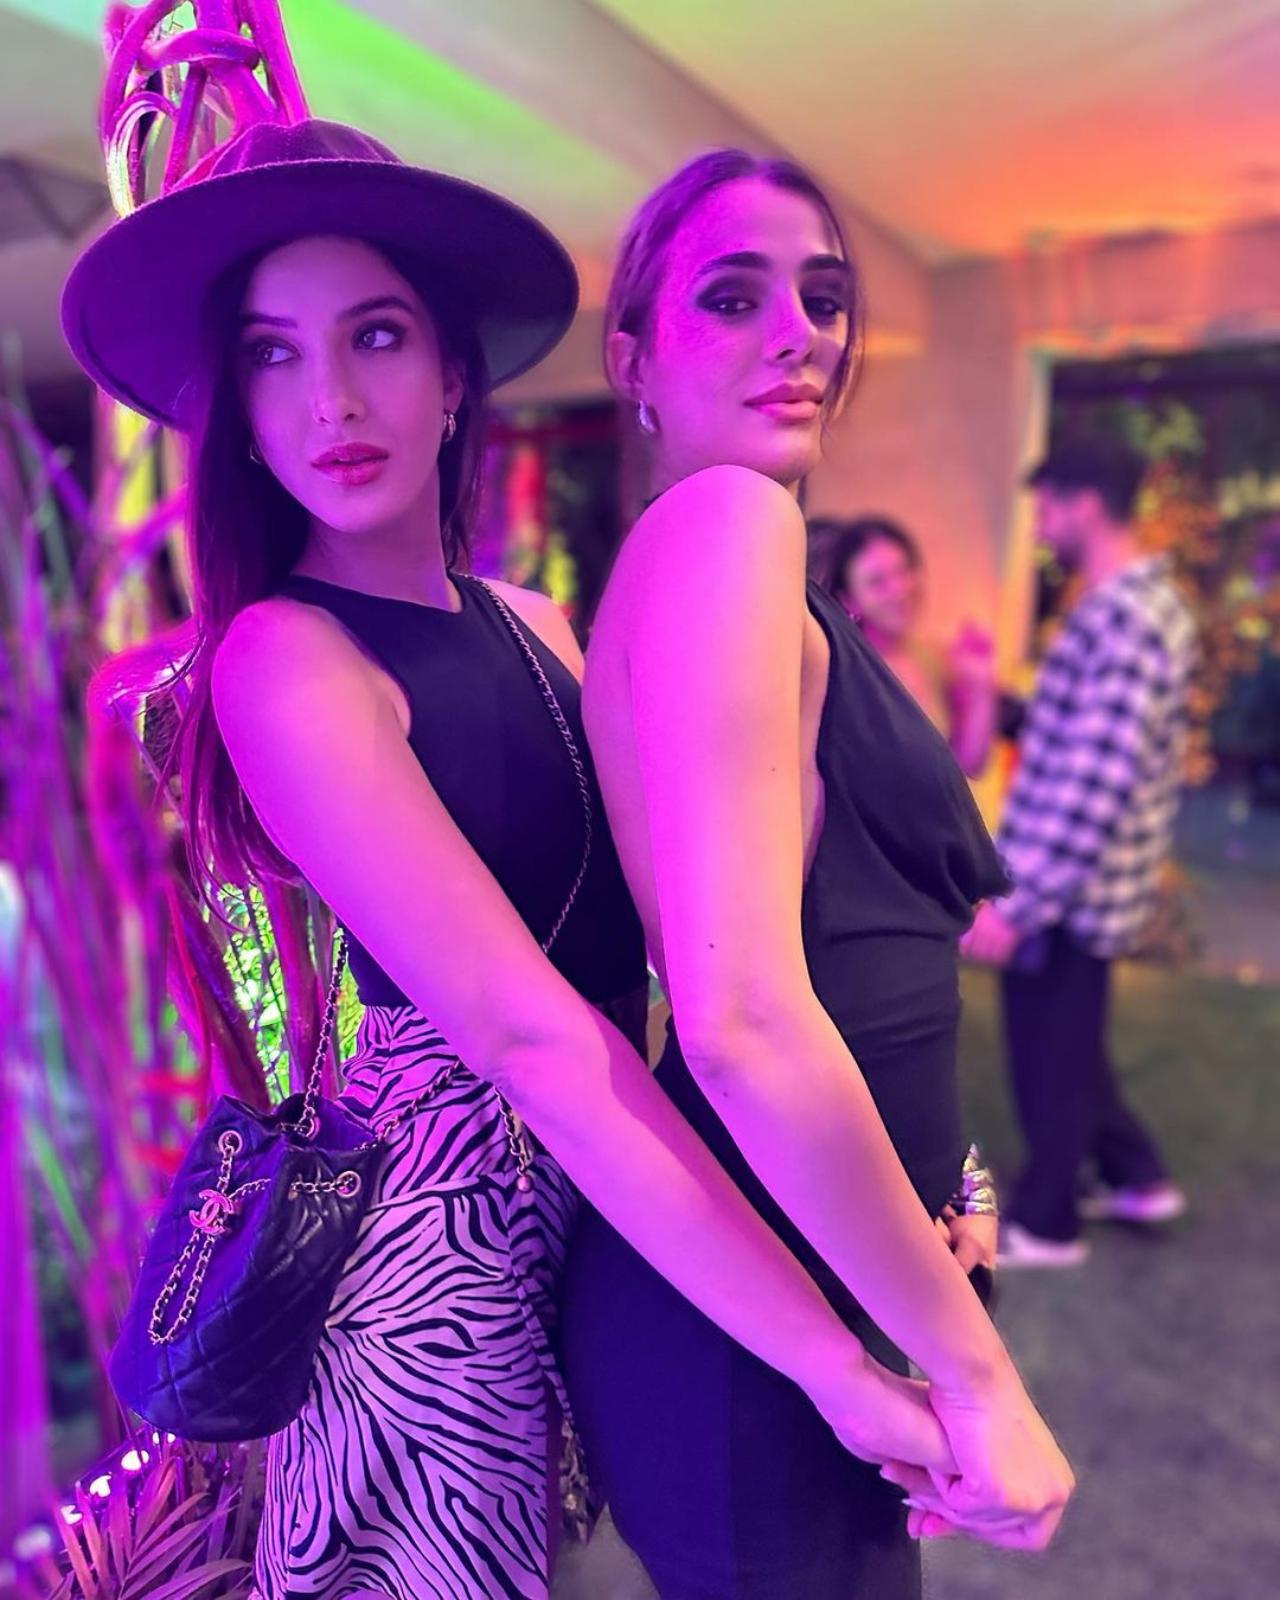 Shanaya Kapoor, daughter of Sanjay and Maheep Kapoor, took to her Instagram feed to share a couple of pictures from the night. Here she is seen posing with birthday girl Tania Shroff